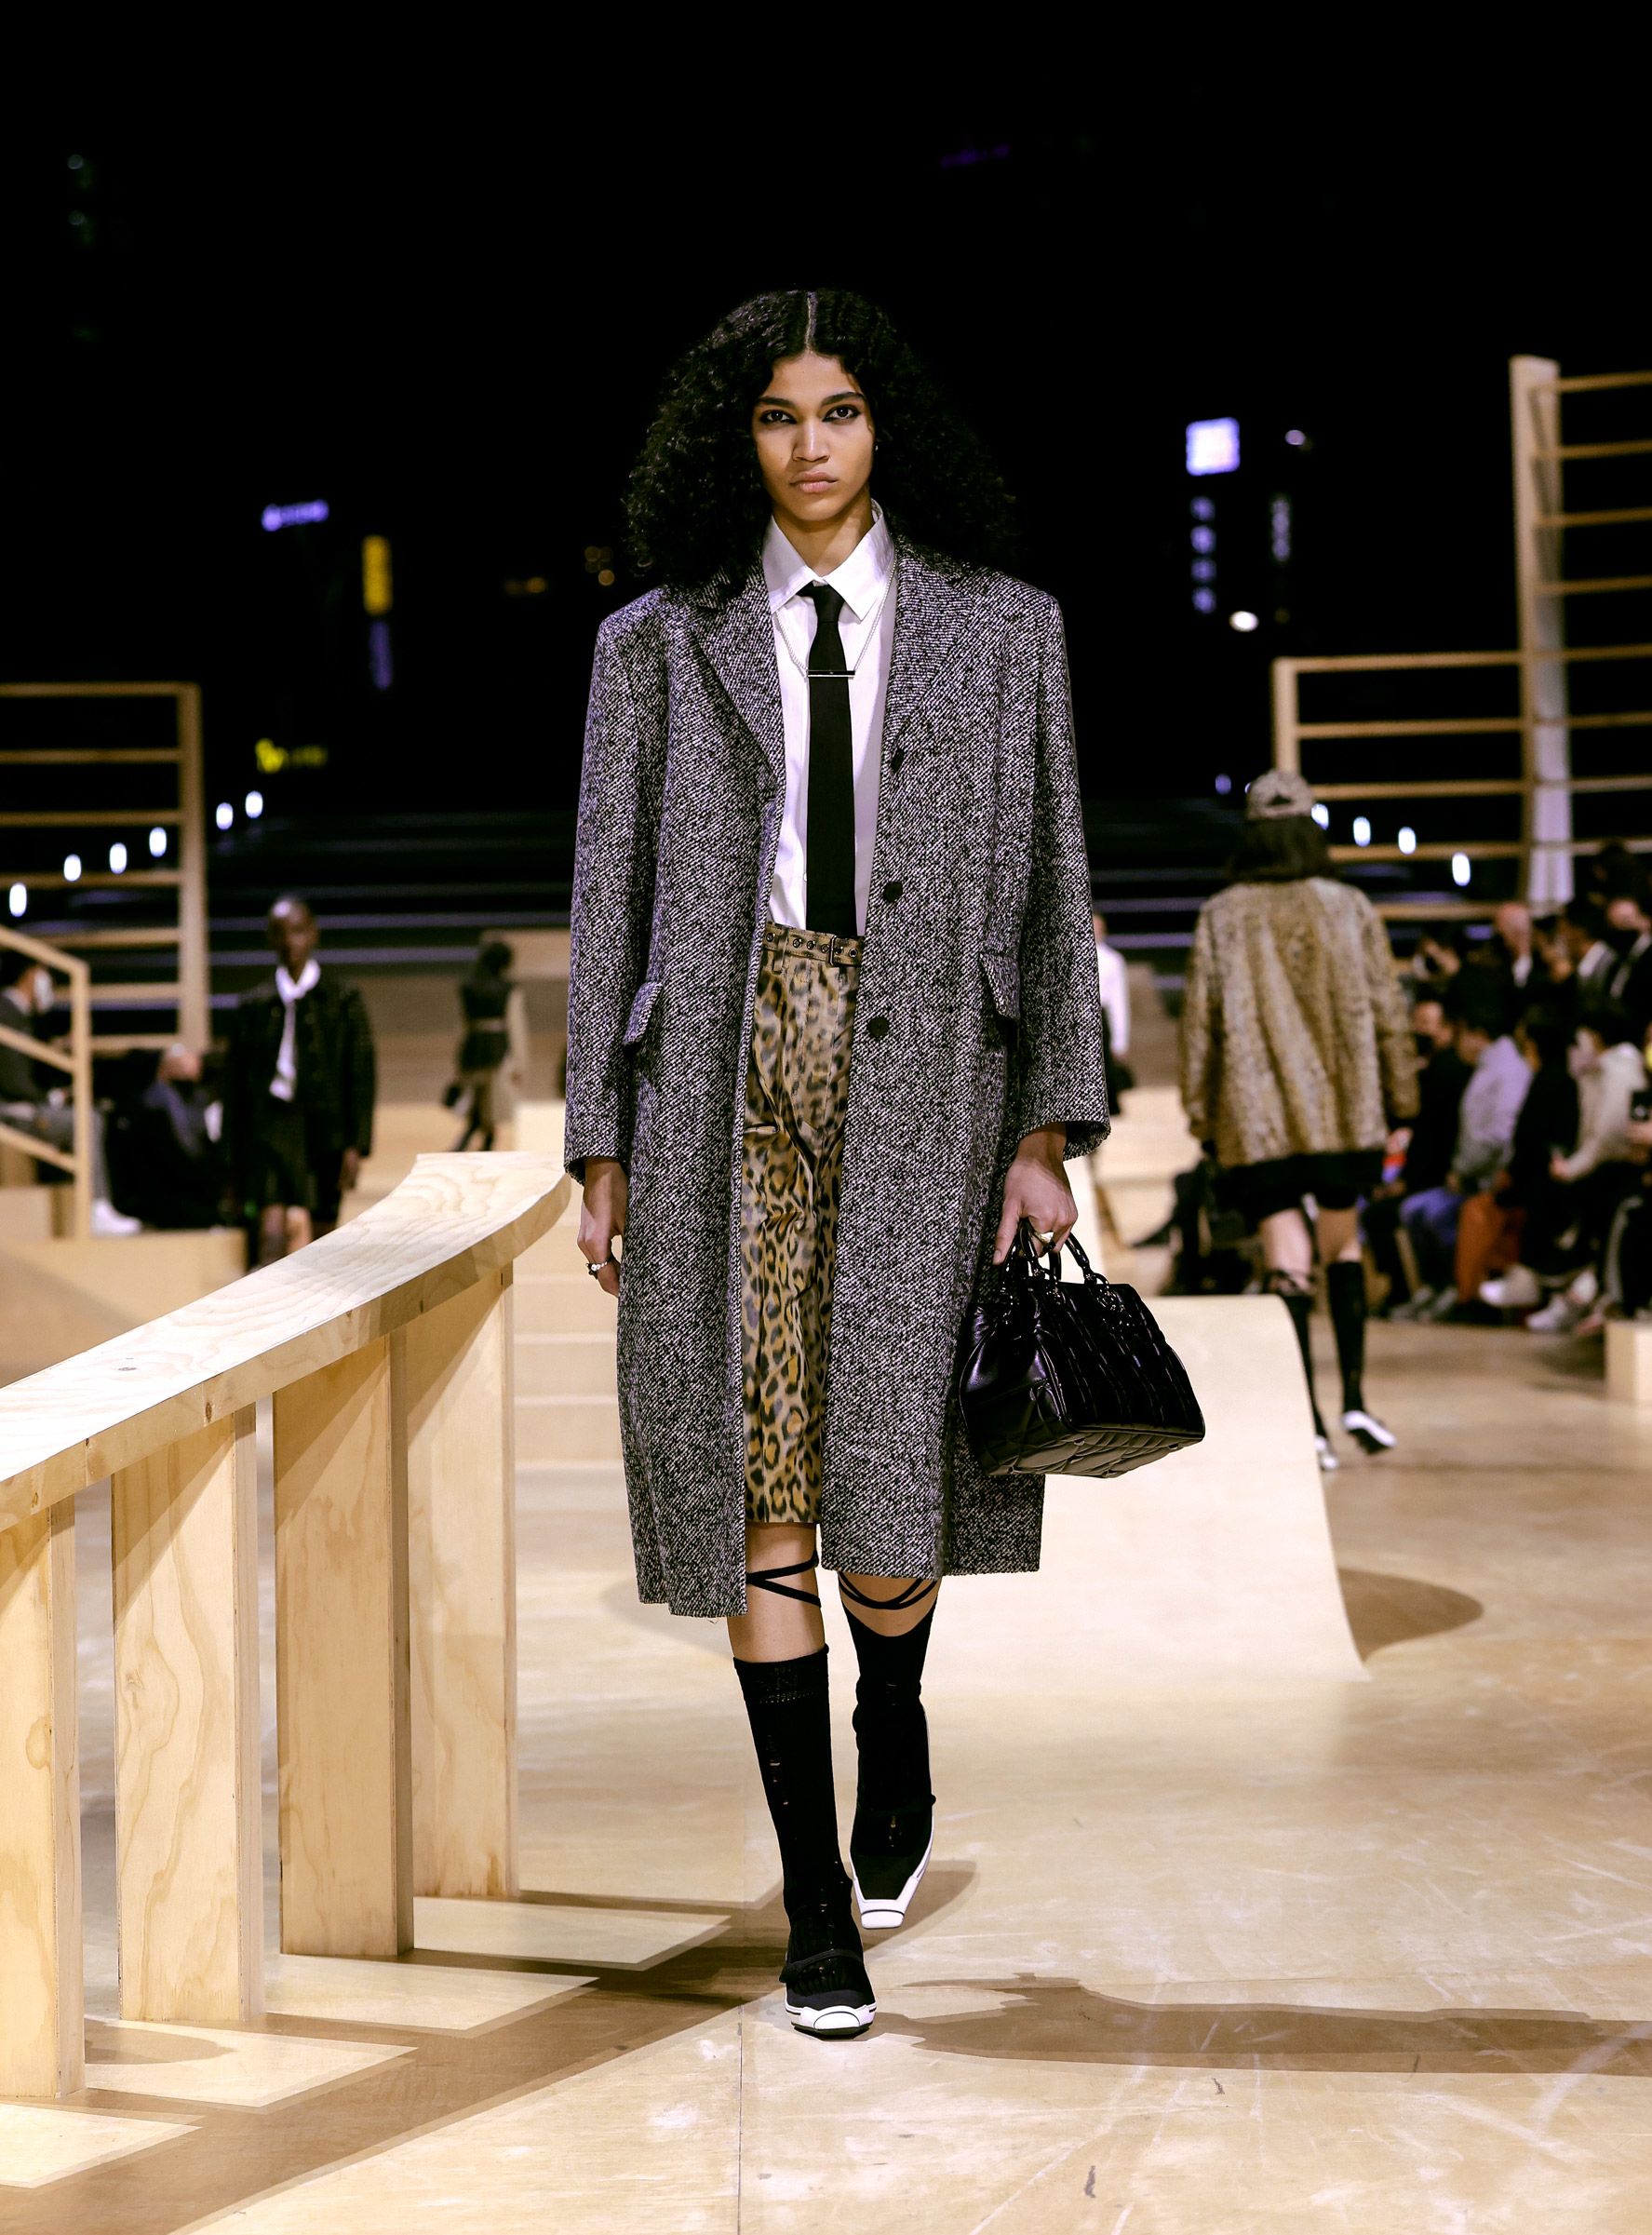 Bags from Louis Vuitton FW 2022 runway show (Fall/Winter) with